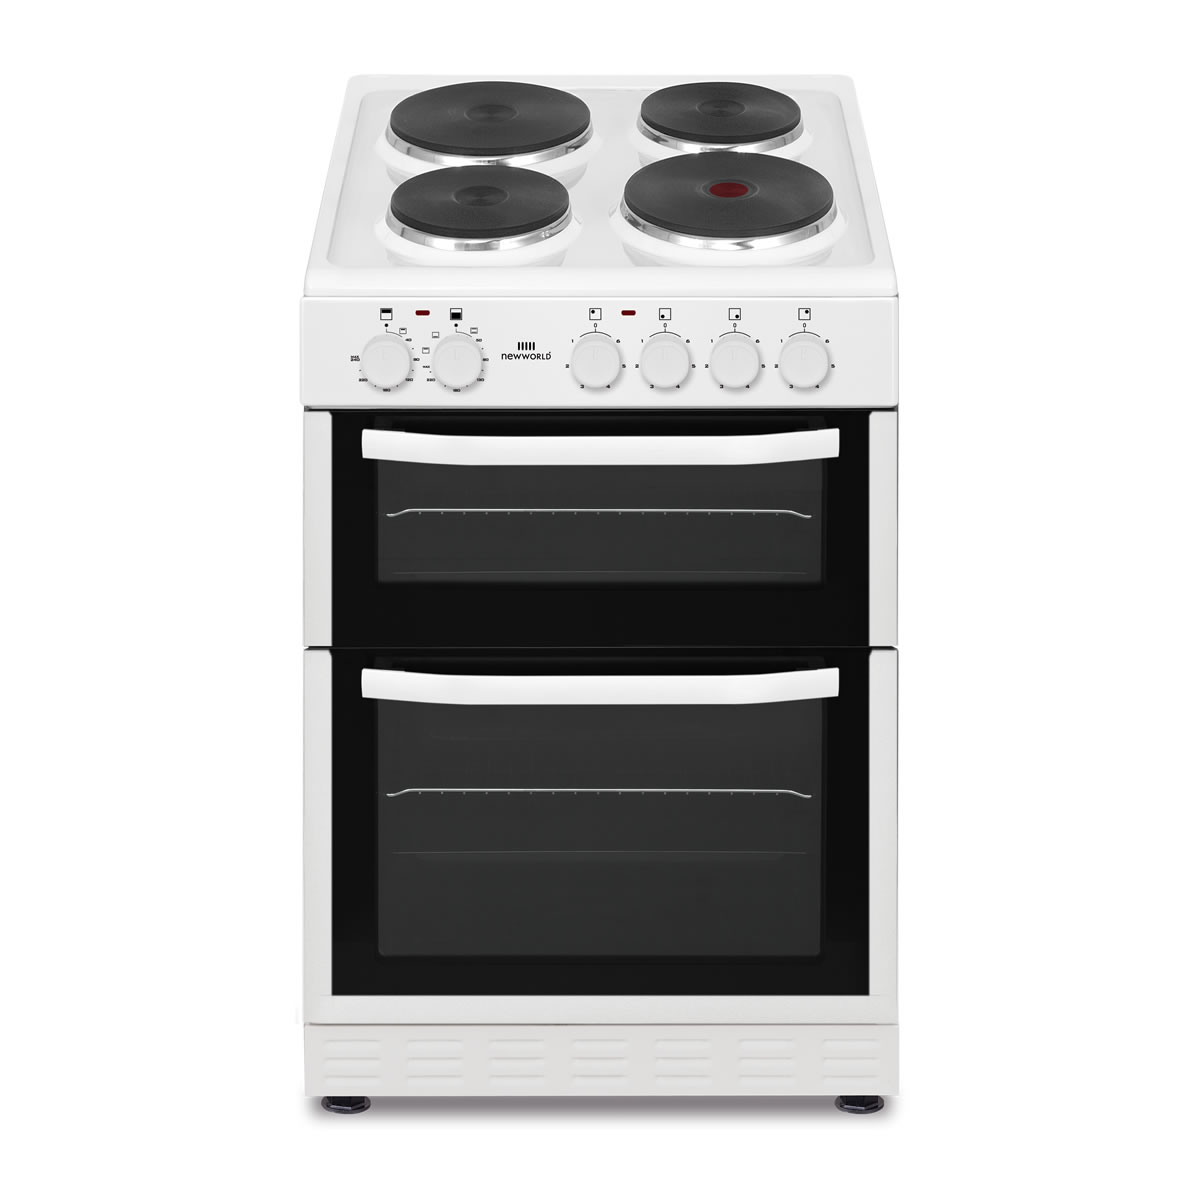 New-World 500mm Twin Cavity Electric Cooker Solid Plate Hob White